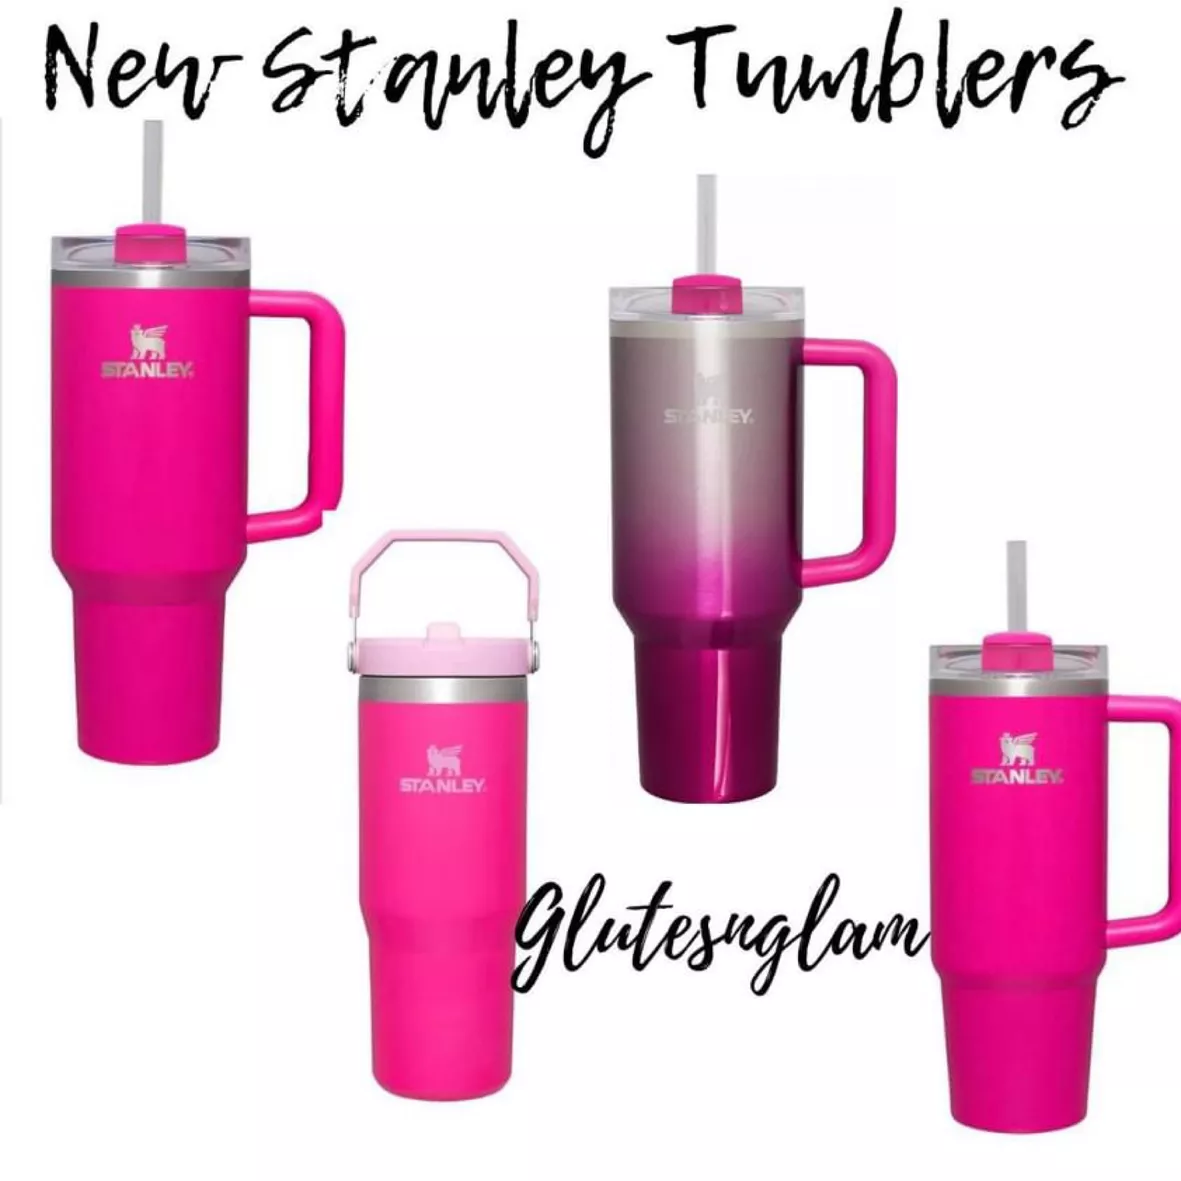 Barbie Stanley Cup: Where To Buy the 40 Oz Quencher Tumbler